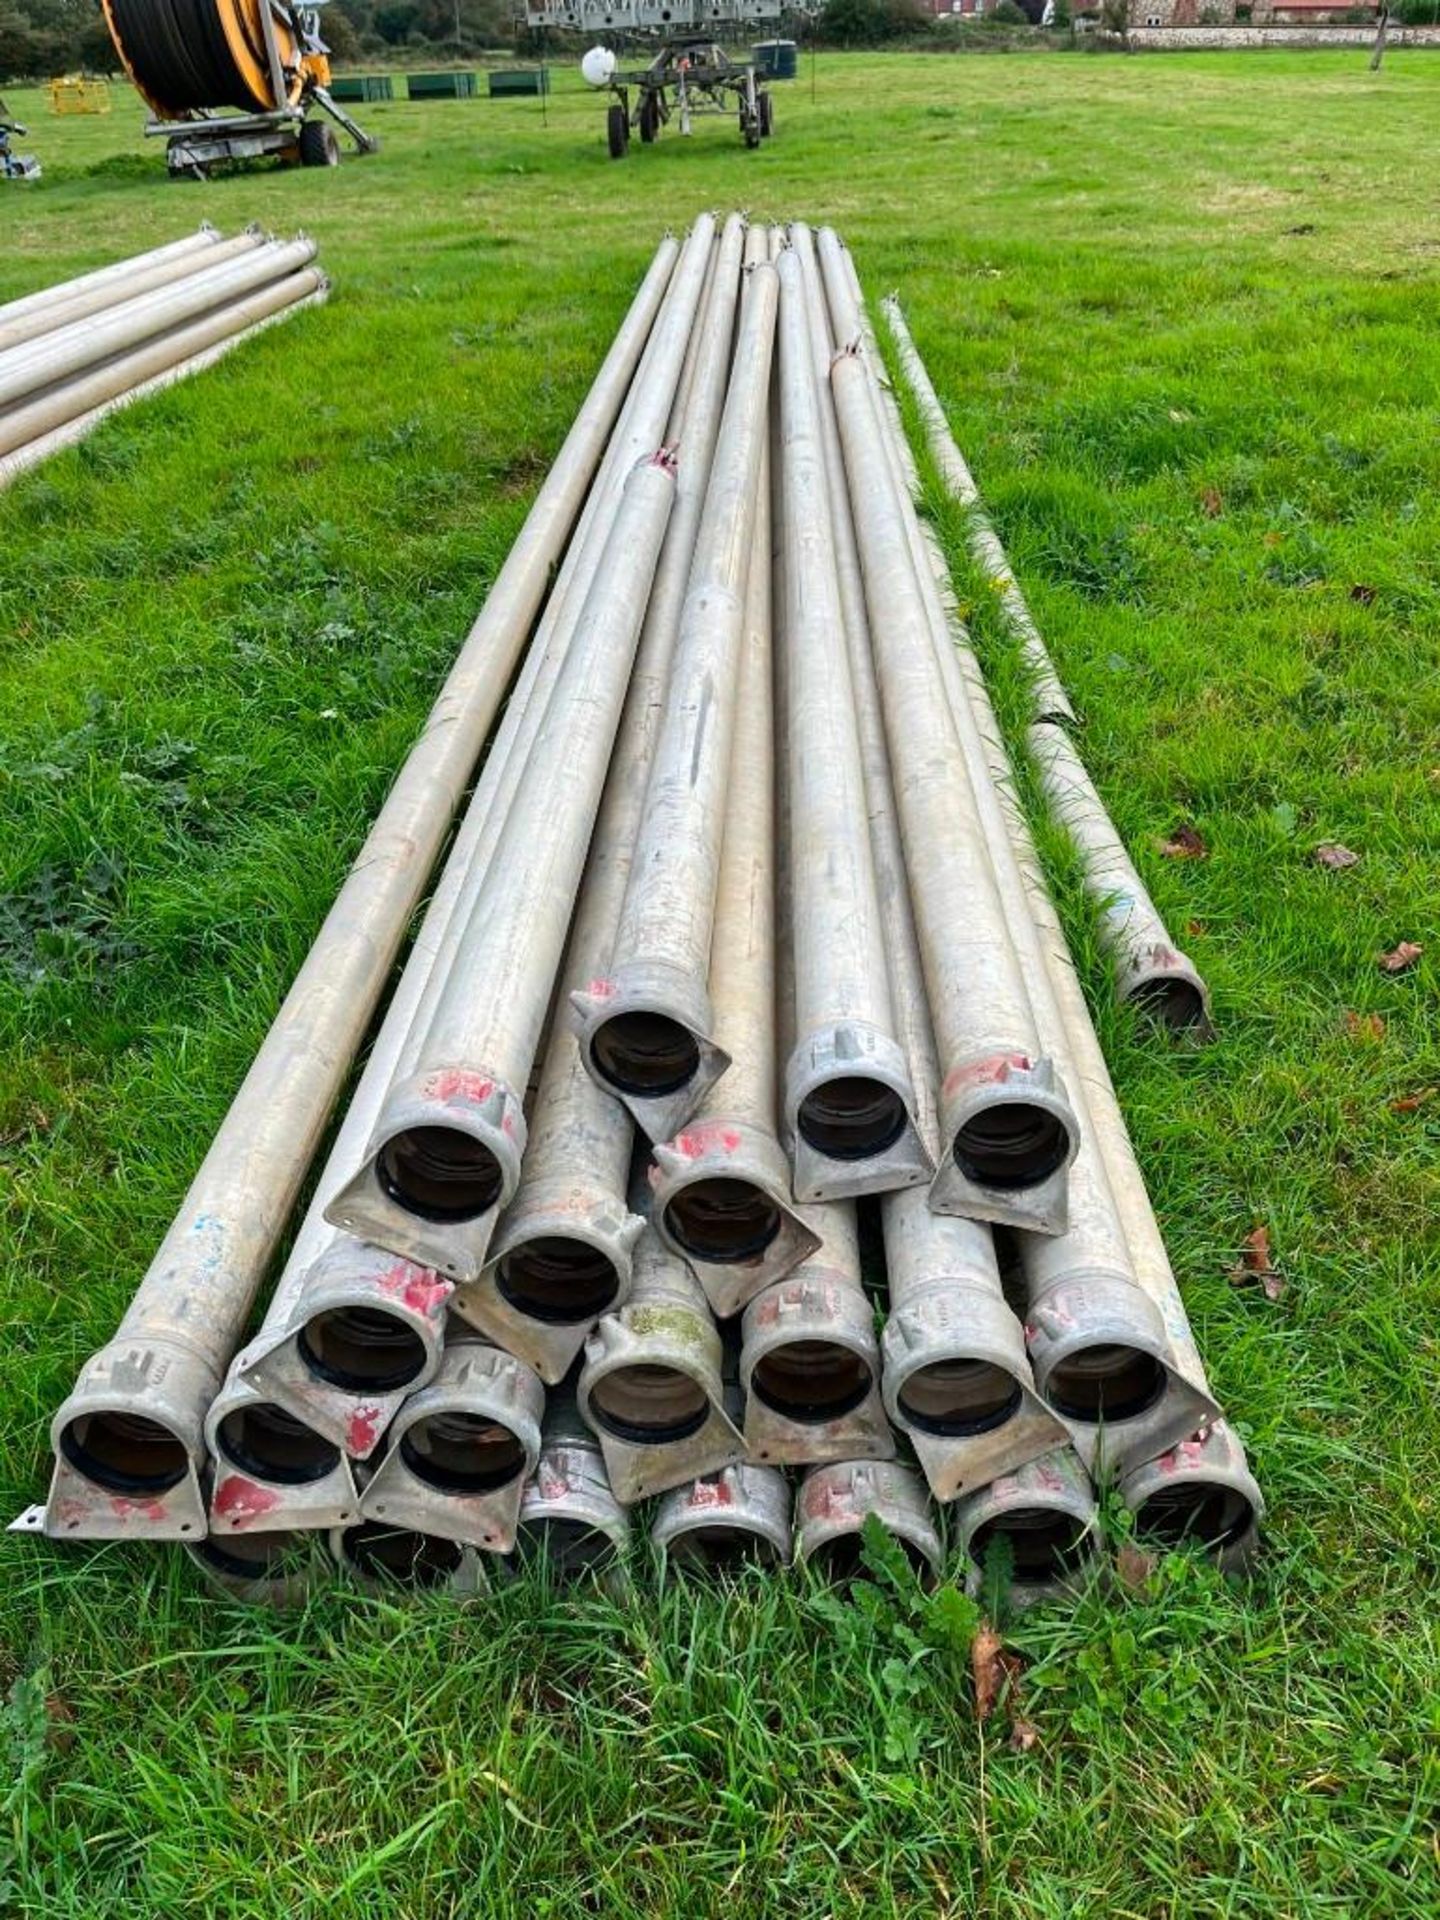 22No. 5" Wright Rain Irrigation Pipes, Misc Lengths